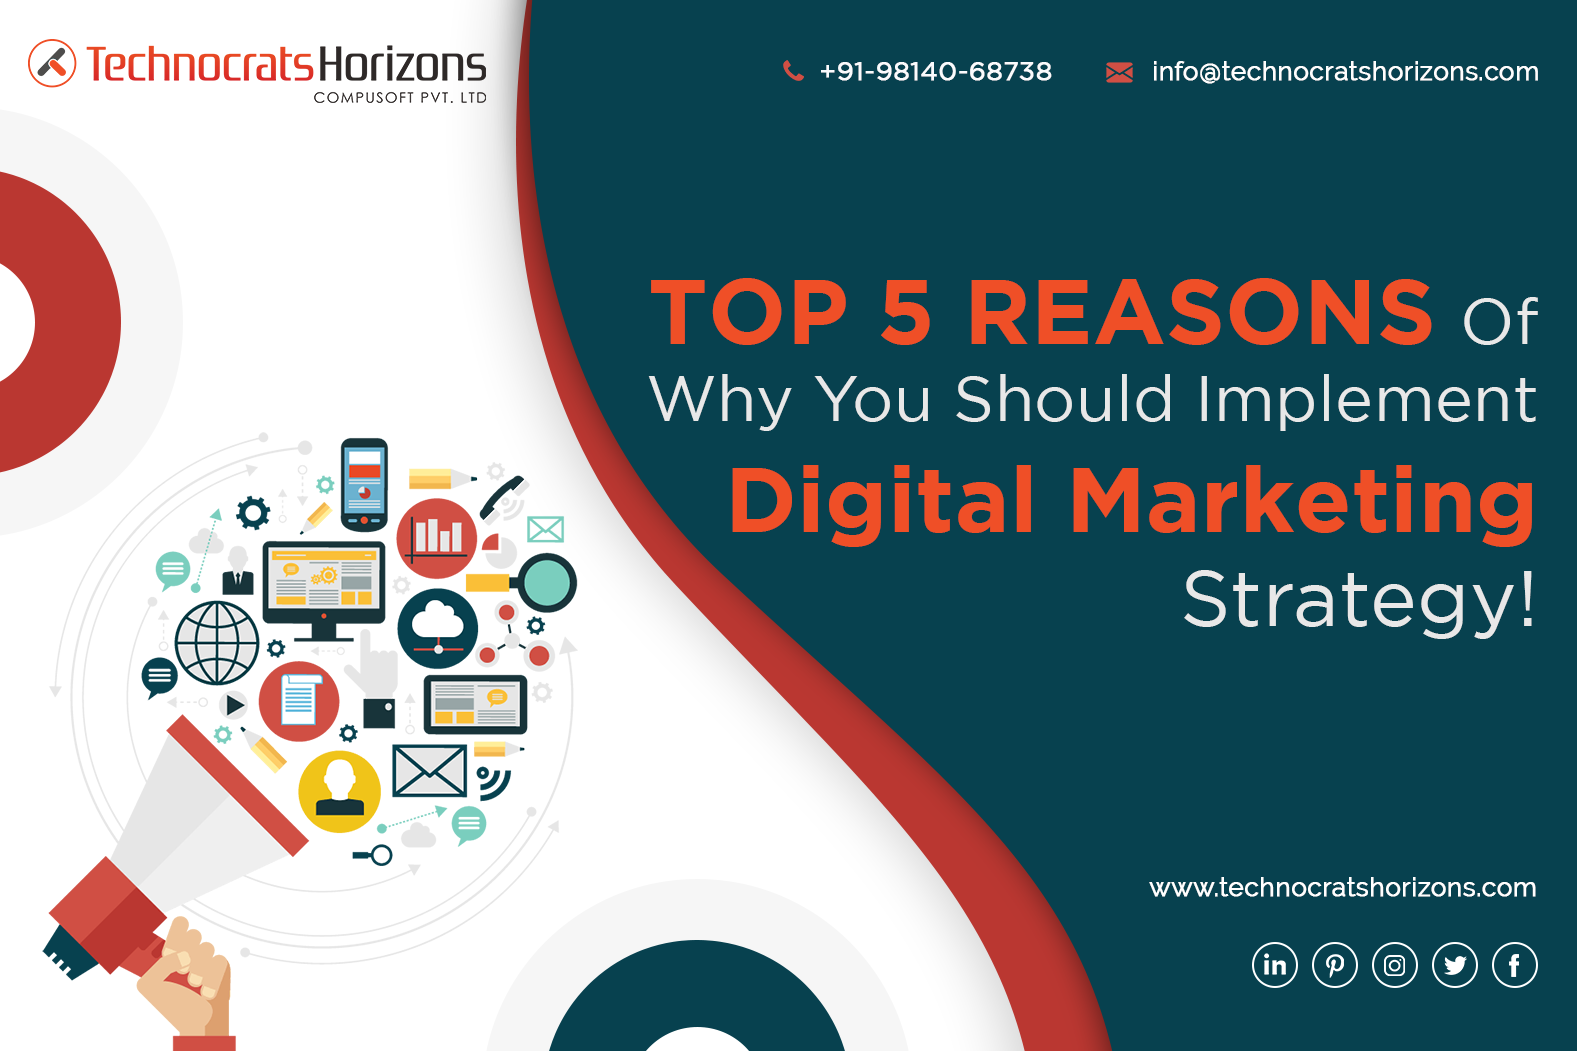 Top 5 Reasons Why You Should Implement Digital Marketing Strategy!